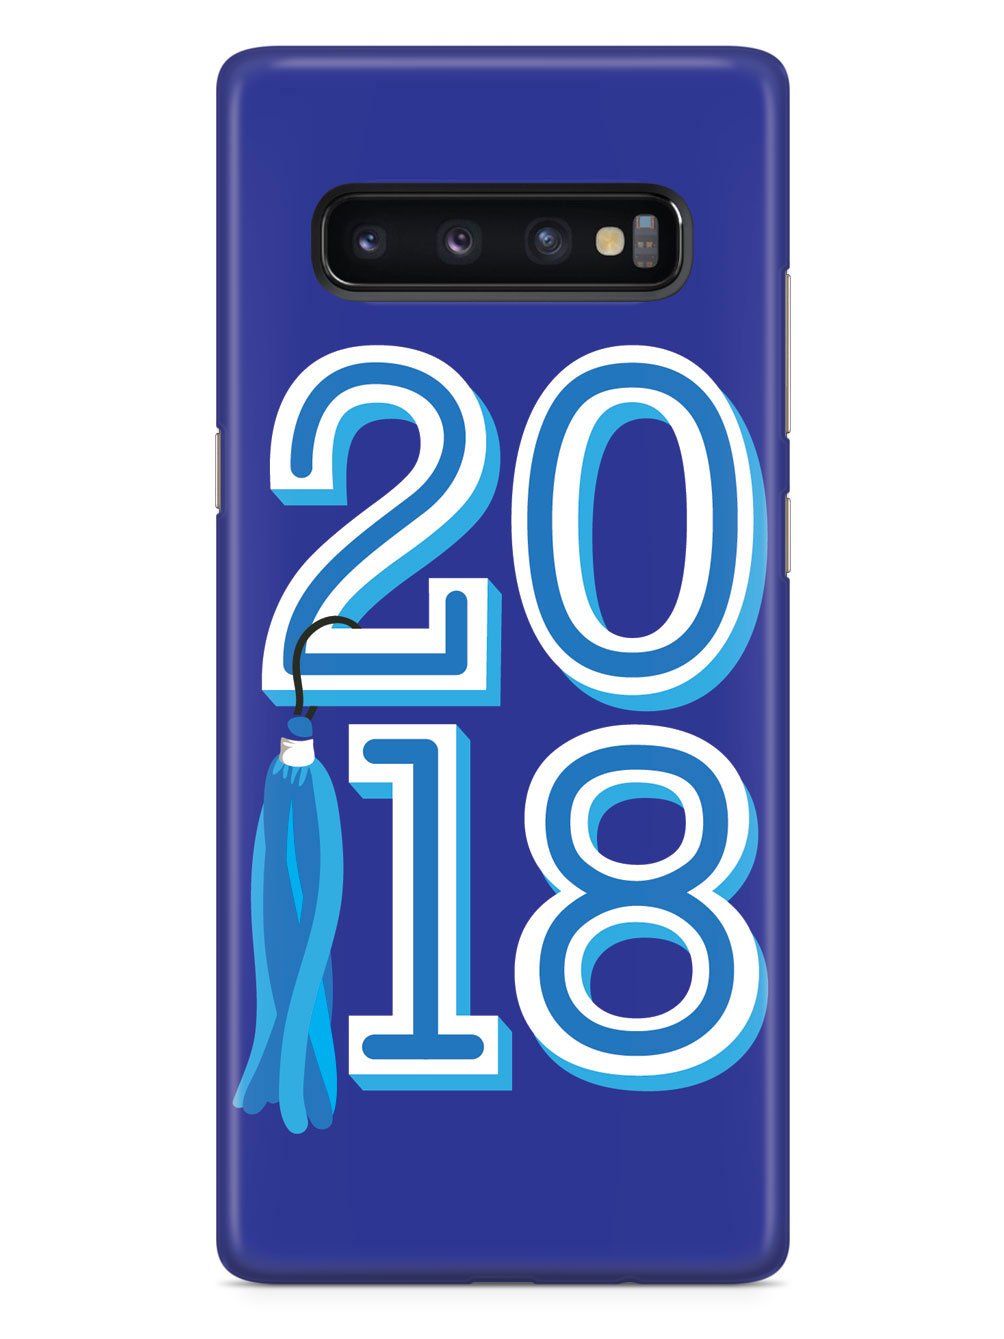 Class of 2018 - Blue - White Case